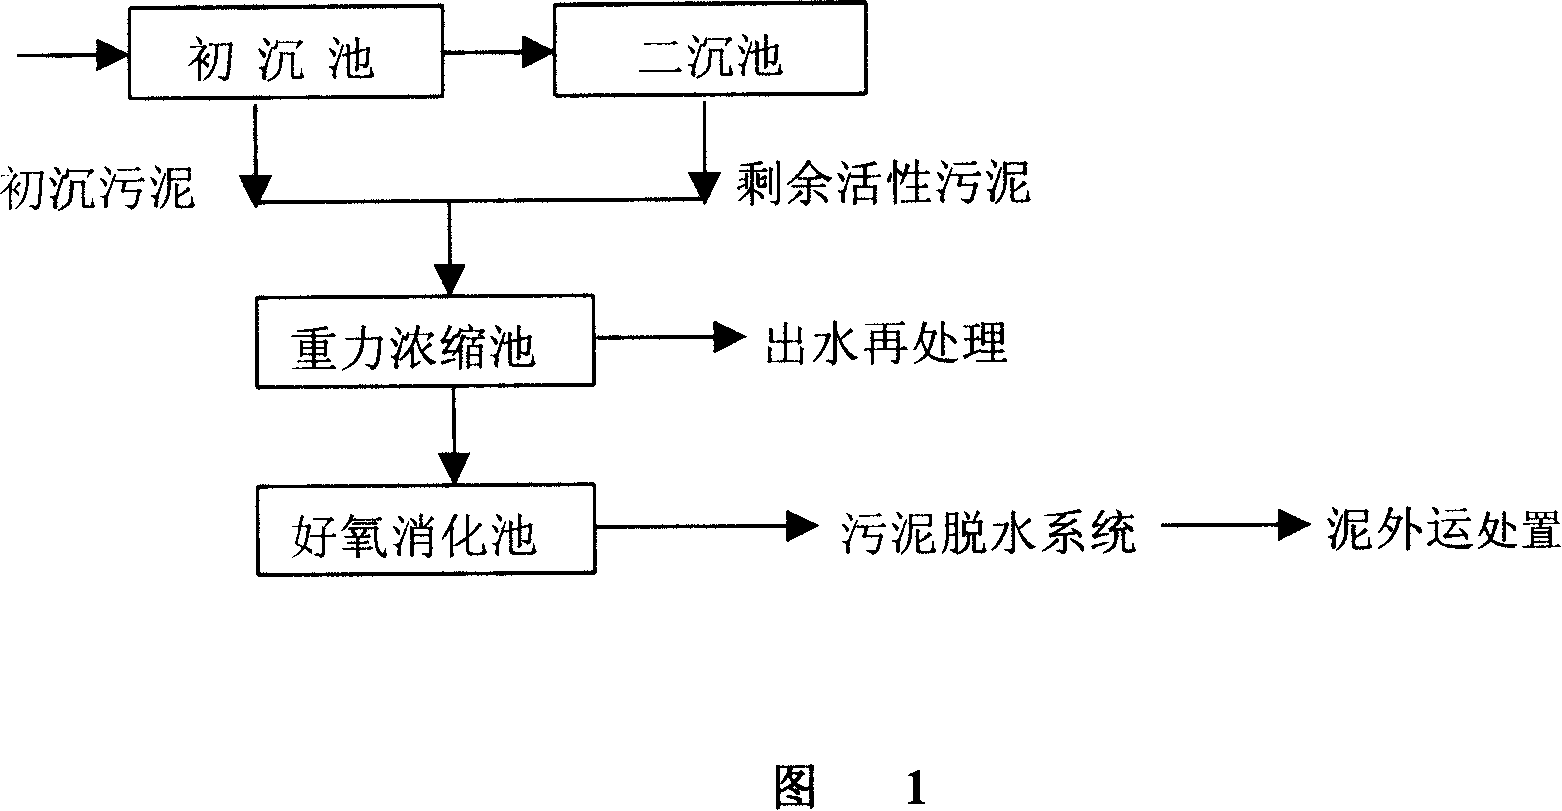 Process for concentrating, assimilating and treating flat plate film sludge synchronously